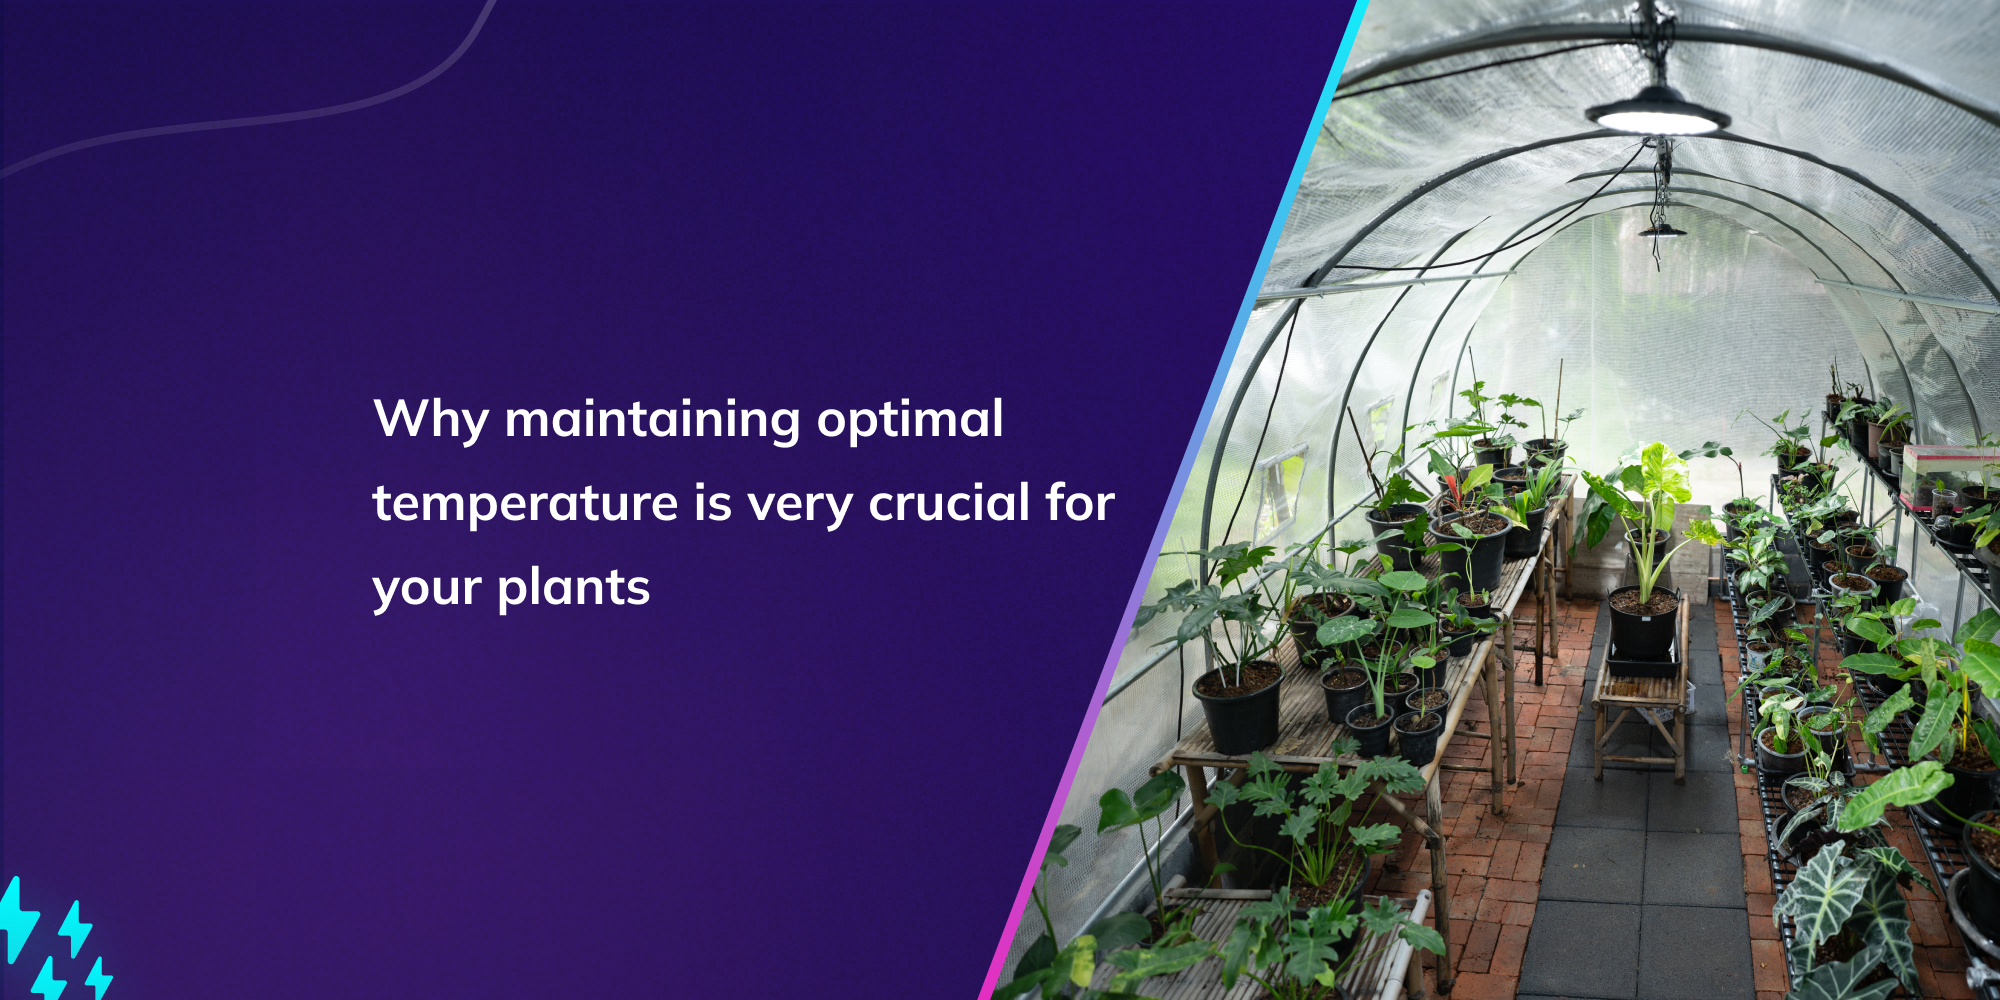 Why maintaining optimal temperature is very crucial for your plants